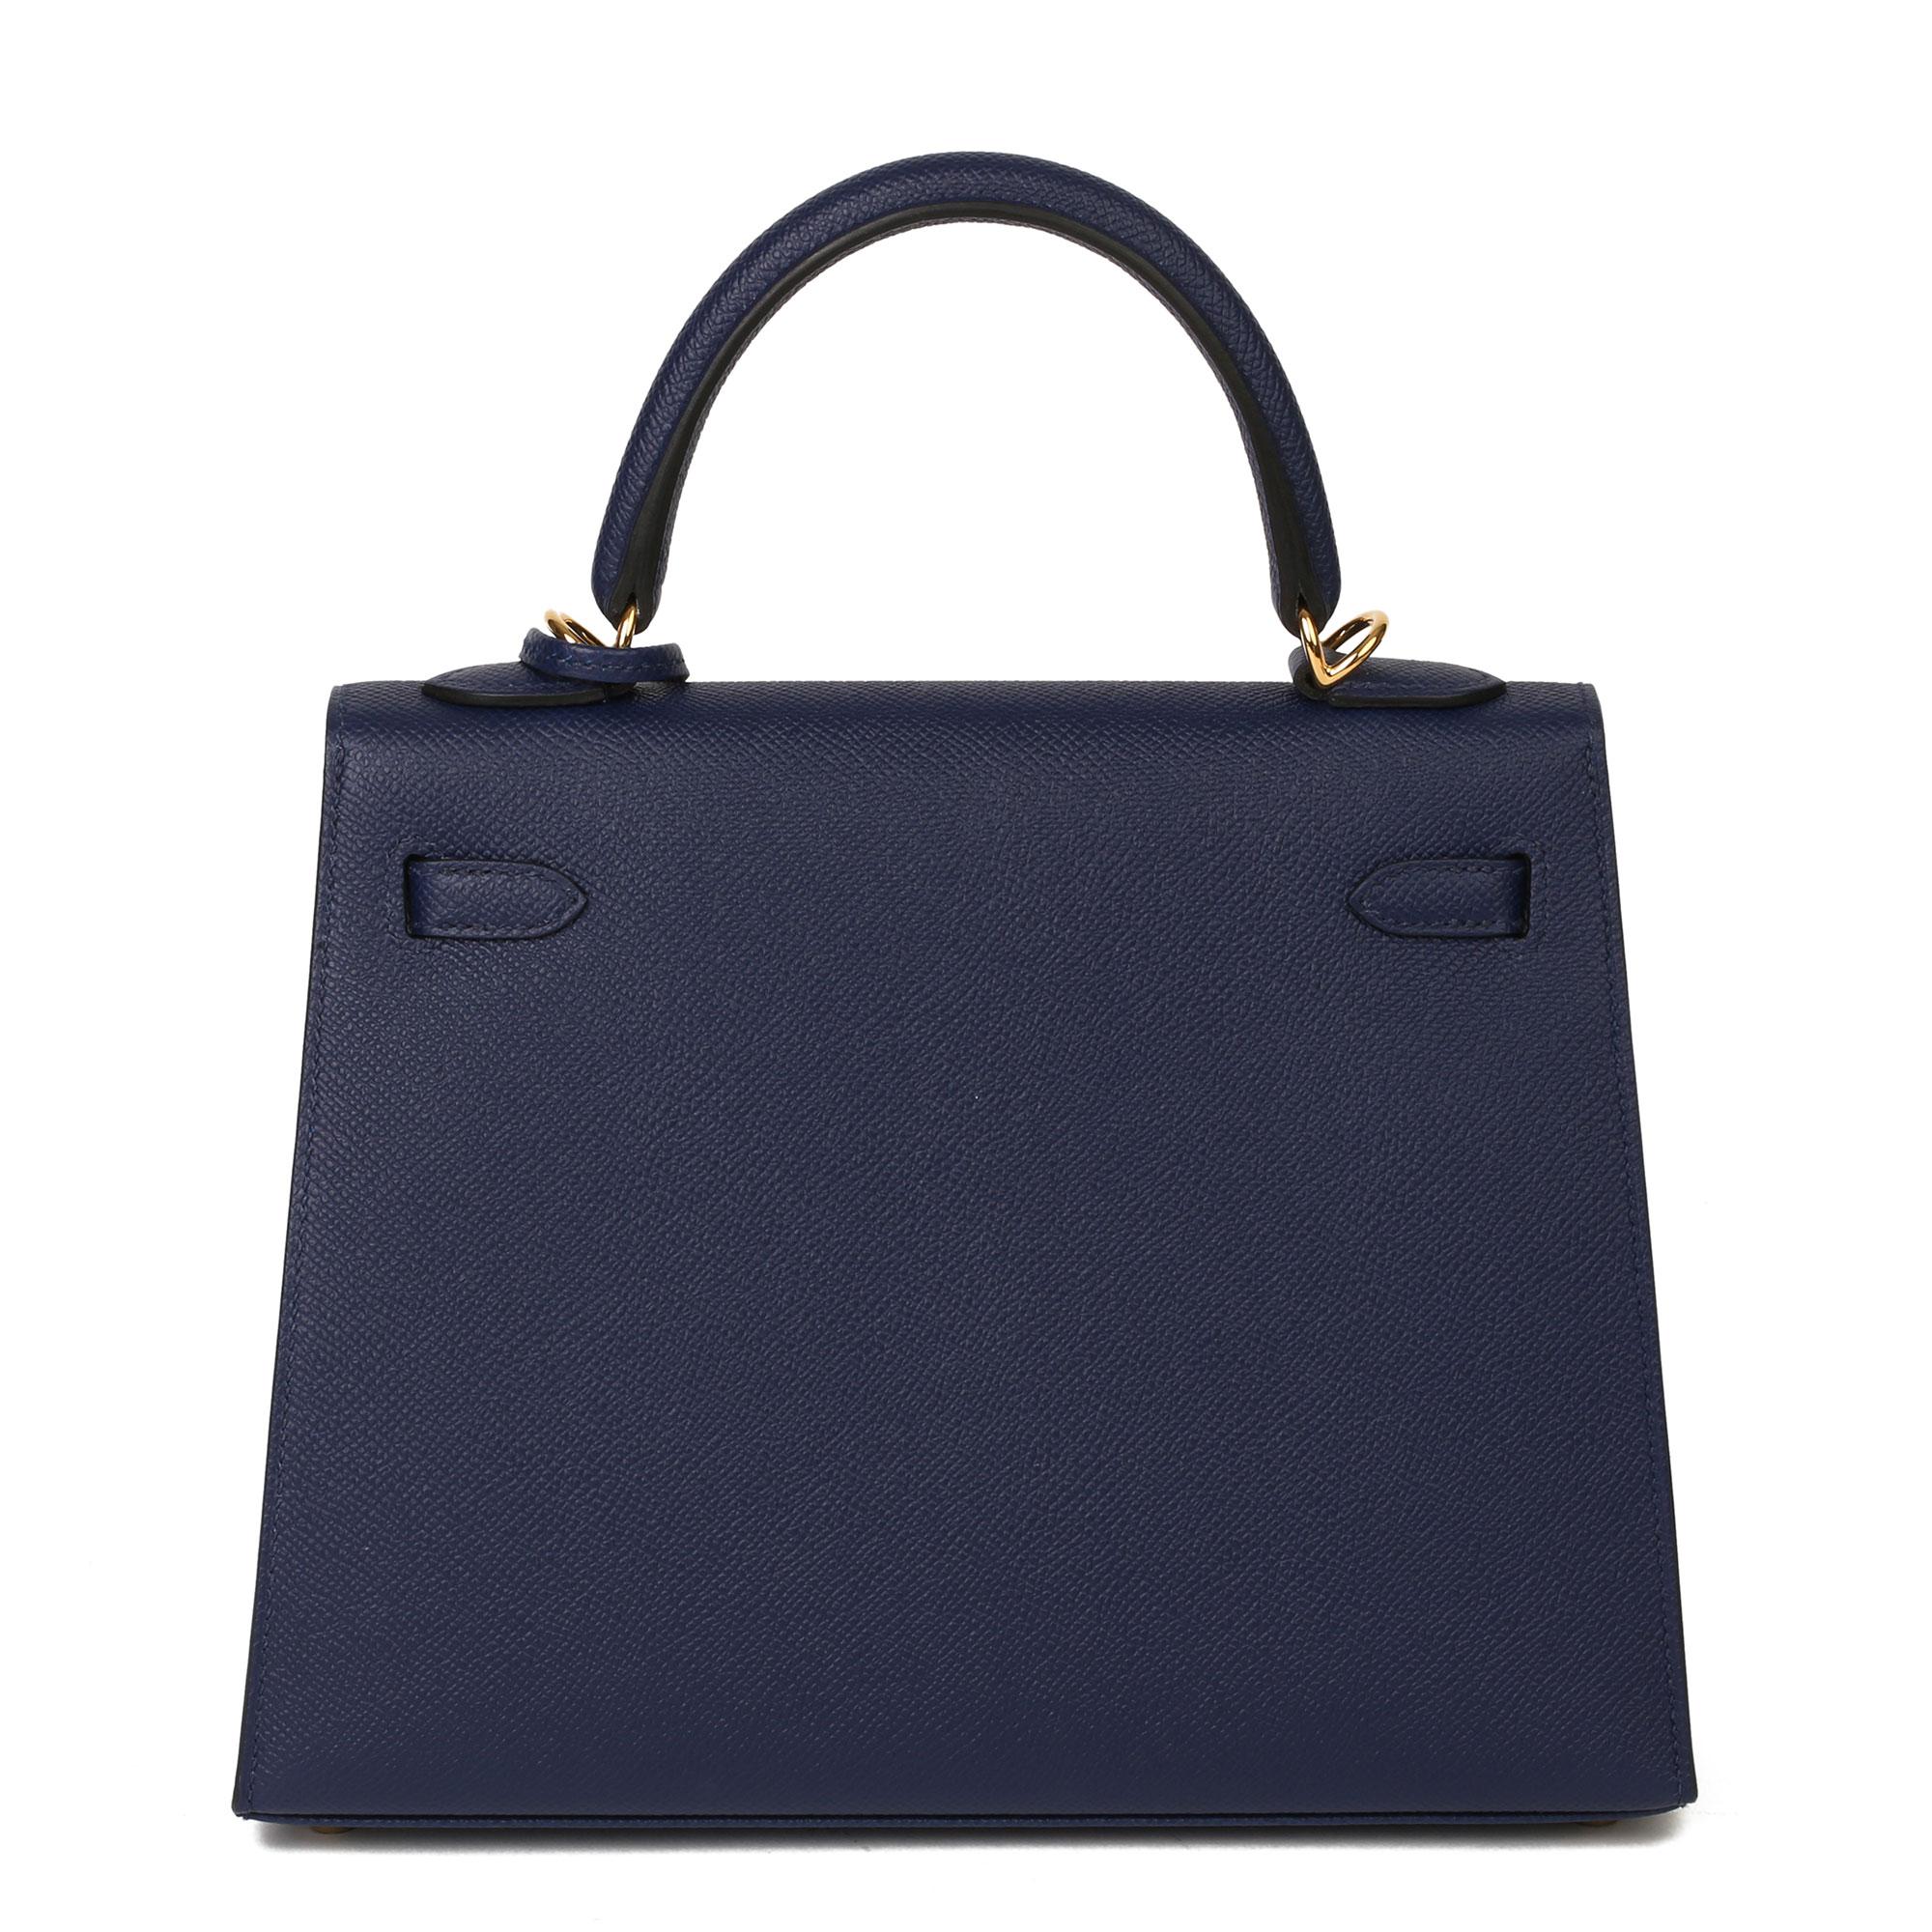 HERMÈS
Blue Saphir Epsom Leather Kelly 25cm Sellier

Xupes Reference: HBJJLG013
Serial Number: Y
Age (Circa): 2020
Accompanied By: Hermès Dust Bag, Box, Padlock, Keys, Clochette, Shoulder Strap, Rain Cover, Receipt, Protective Felt
Authenticity